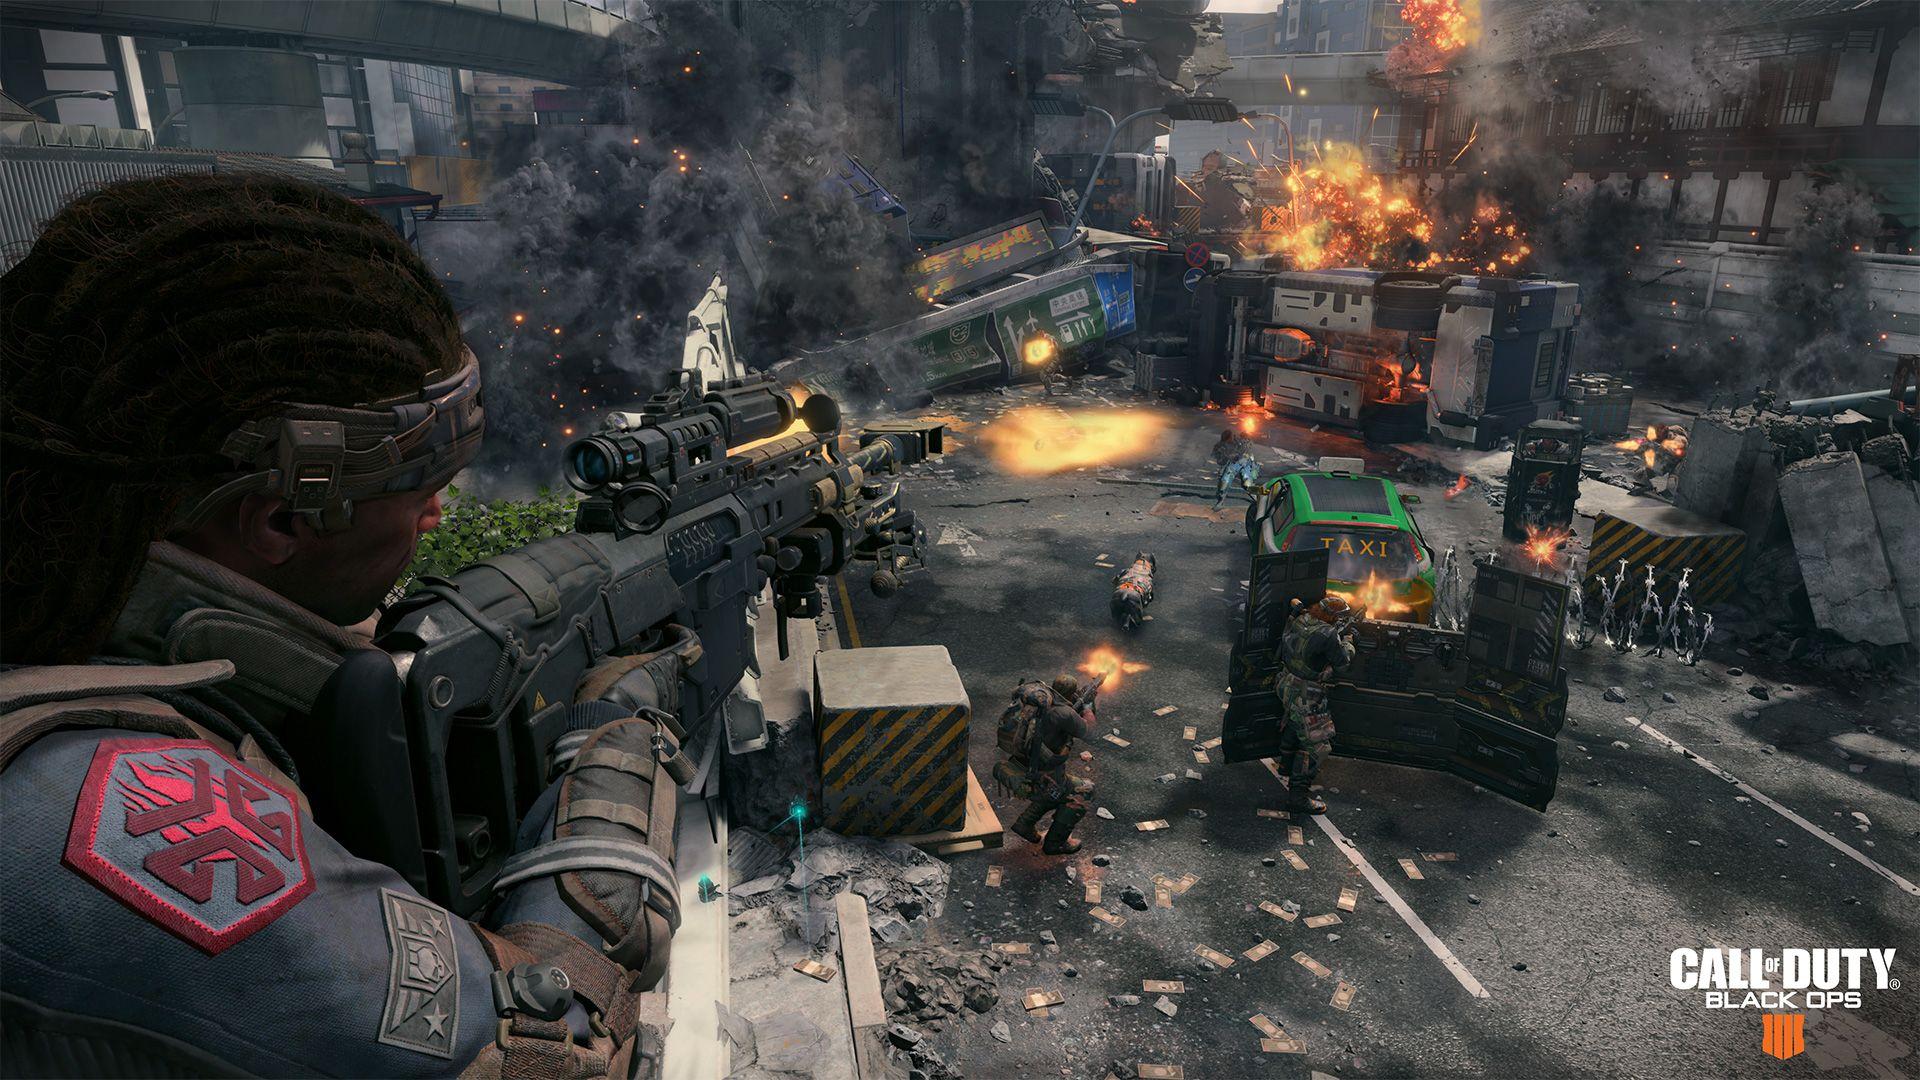 Review of Duty: Black Ops 4 is solid but overly familiar